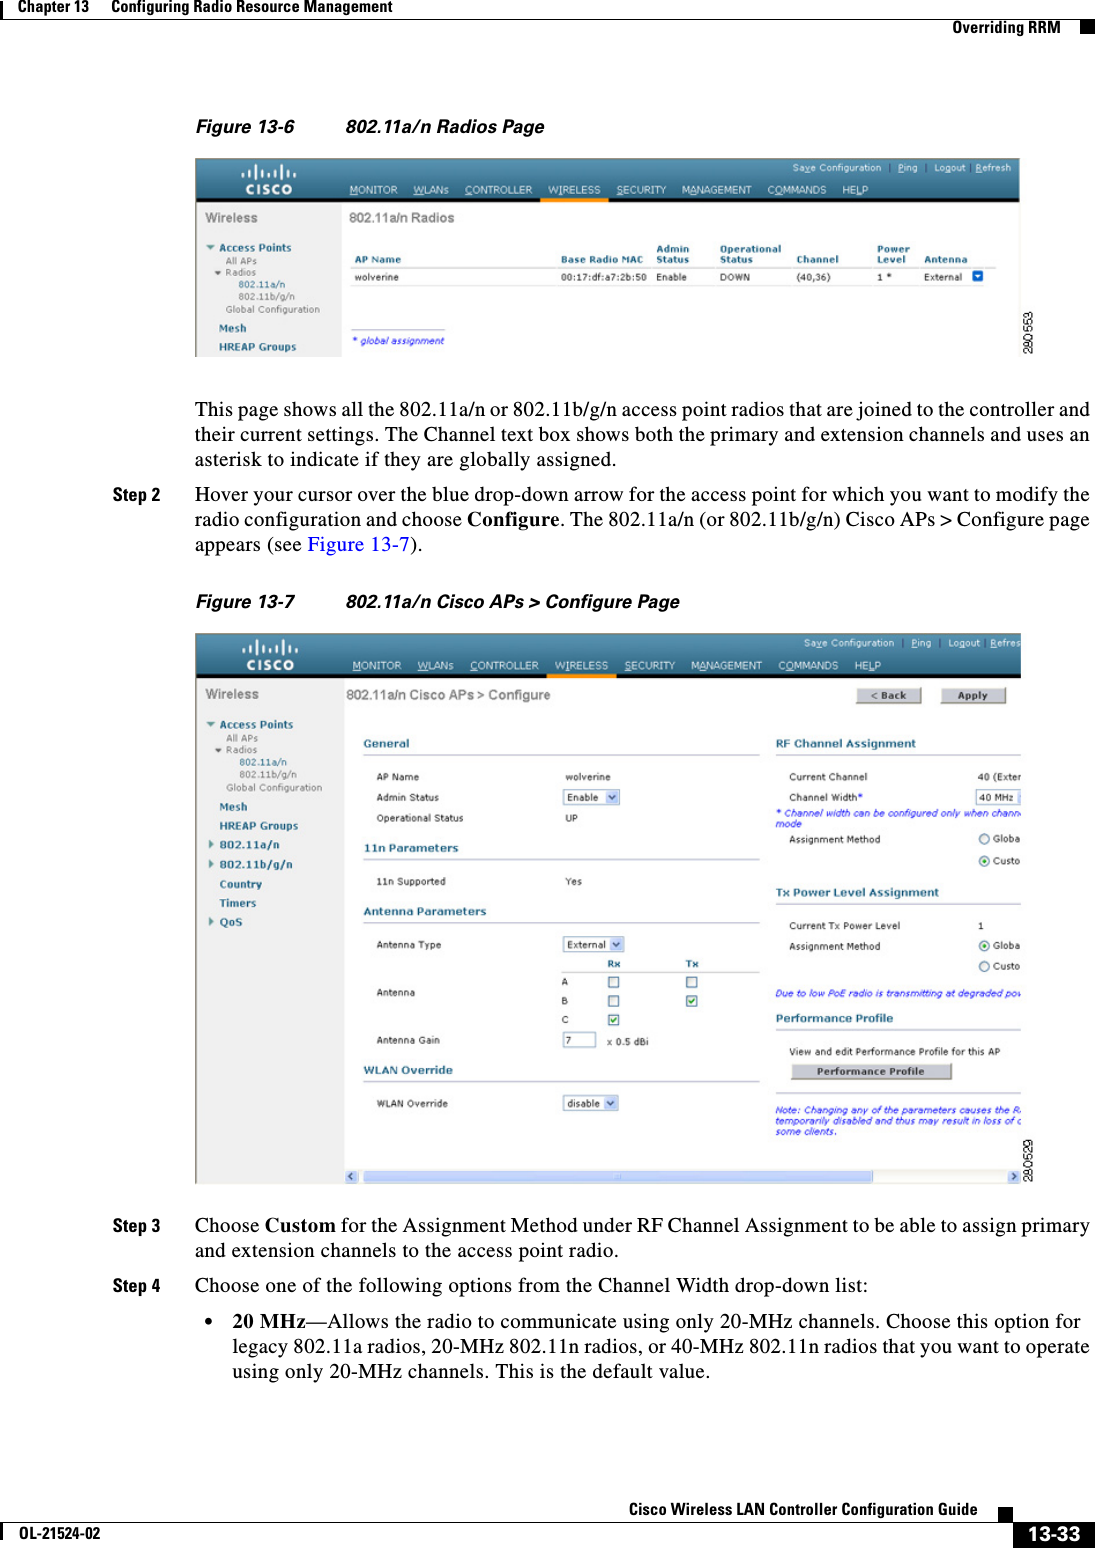  13-33Cisco Wireless LAN Controller Configuration GuideOL-21524-02Chapter 13      Configuring Radio Resource Management  Overriding RRMFigure 13-6 802.11a/n Radios PageThis page shows all the 802.11a/n or 802.11b/g/n access point radios that are joined to the controller and their current settings. The Channel text box shows both the primary and extension channels and uses an asterisk to indicate if they are globally assigned.Step 2 Hover your cursor over the blue drop-down arrow for the access point for which you want to modify the radio configuration and choose Configure. The 802.11a/n (or 802.11b/g/n) Cisco APs &gt; Configure page appears (see Figure 13-7).Figure 13-7 802.11a/n Cisco APs &gt; Configure PageStep 3 Choose Custom for the Assignment Method under RF Channel Assignment to be able to assign primary and extension channels to the access point radio.Step 4 Choose one of the following options from the Channel Width drop-down list:  • 20 MHz—Allows the radio to communicate using only 20-MHz channels. Choose this option for legacy 802.11a radios, 20-MHz 802.11n radios, or 40-MHz 802.11n radios that you want to operate using only 20-MHz channels. This is the default value.